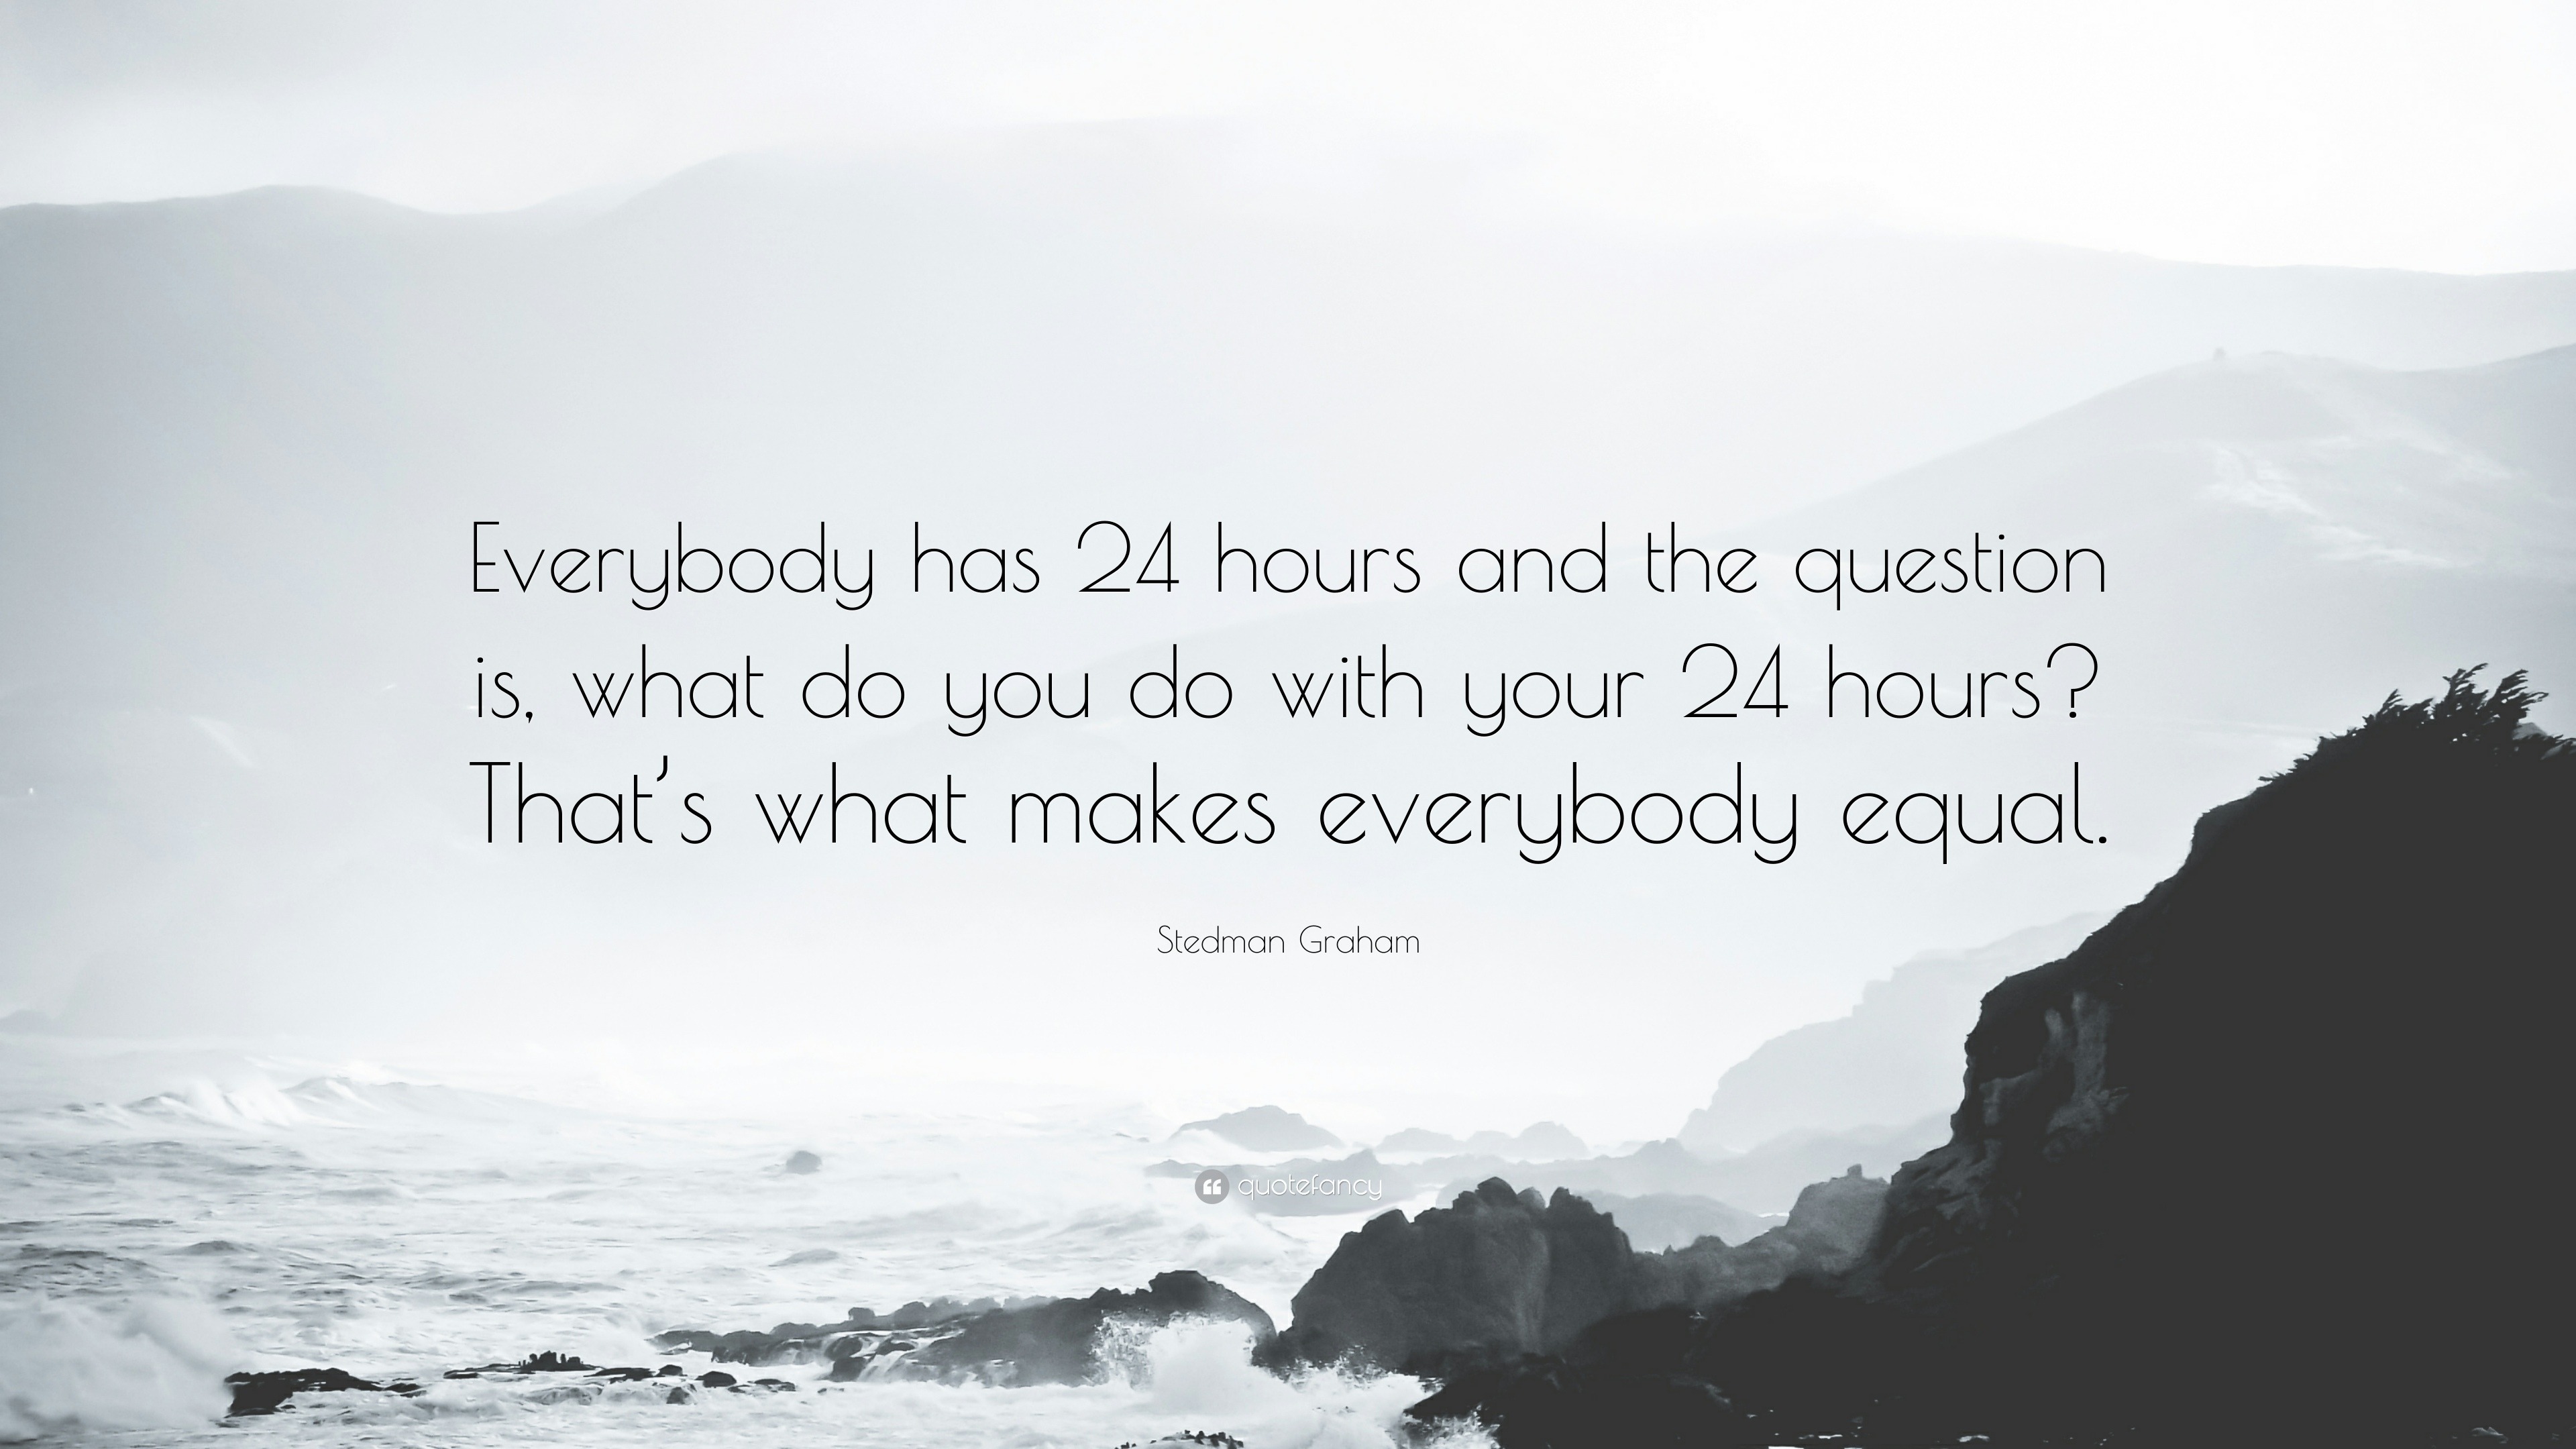 Stedman Graham Quote: “Everybody has  hours and the question is